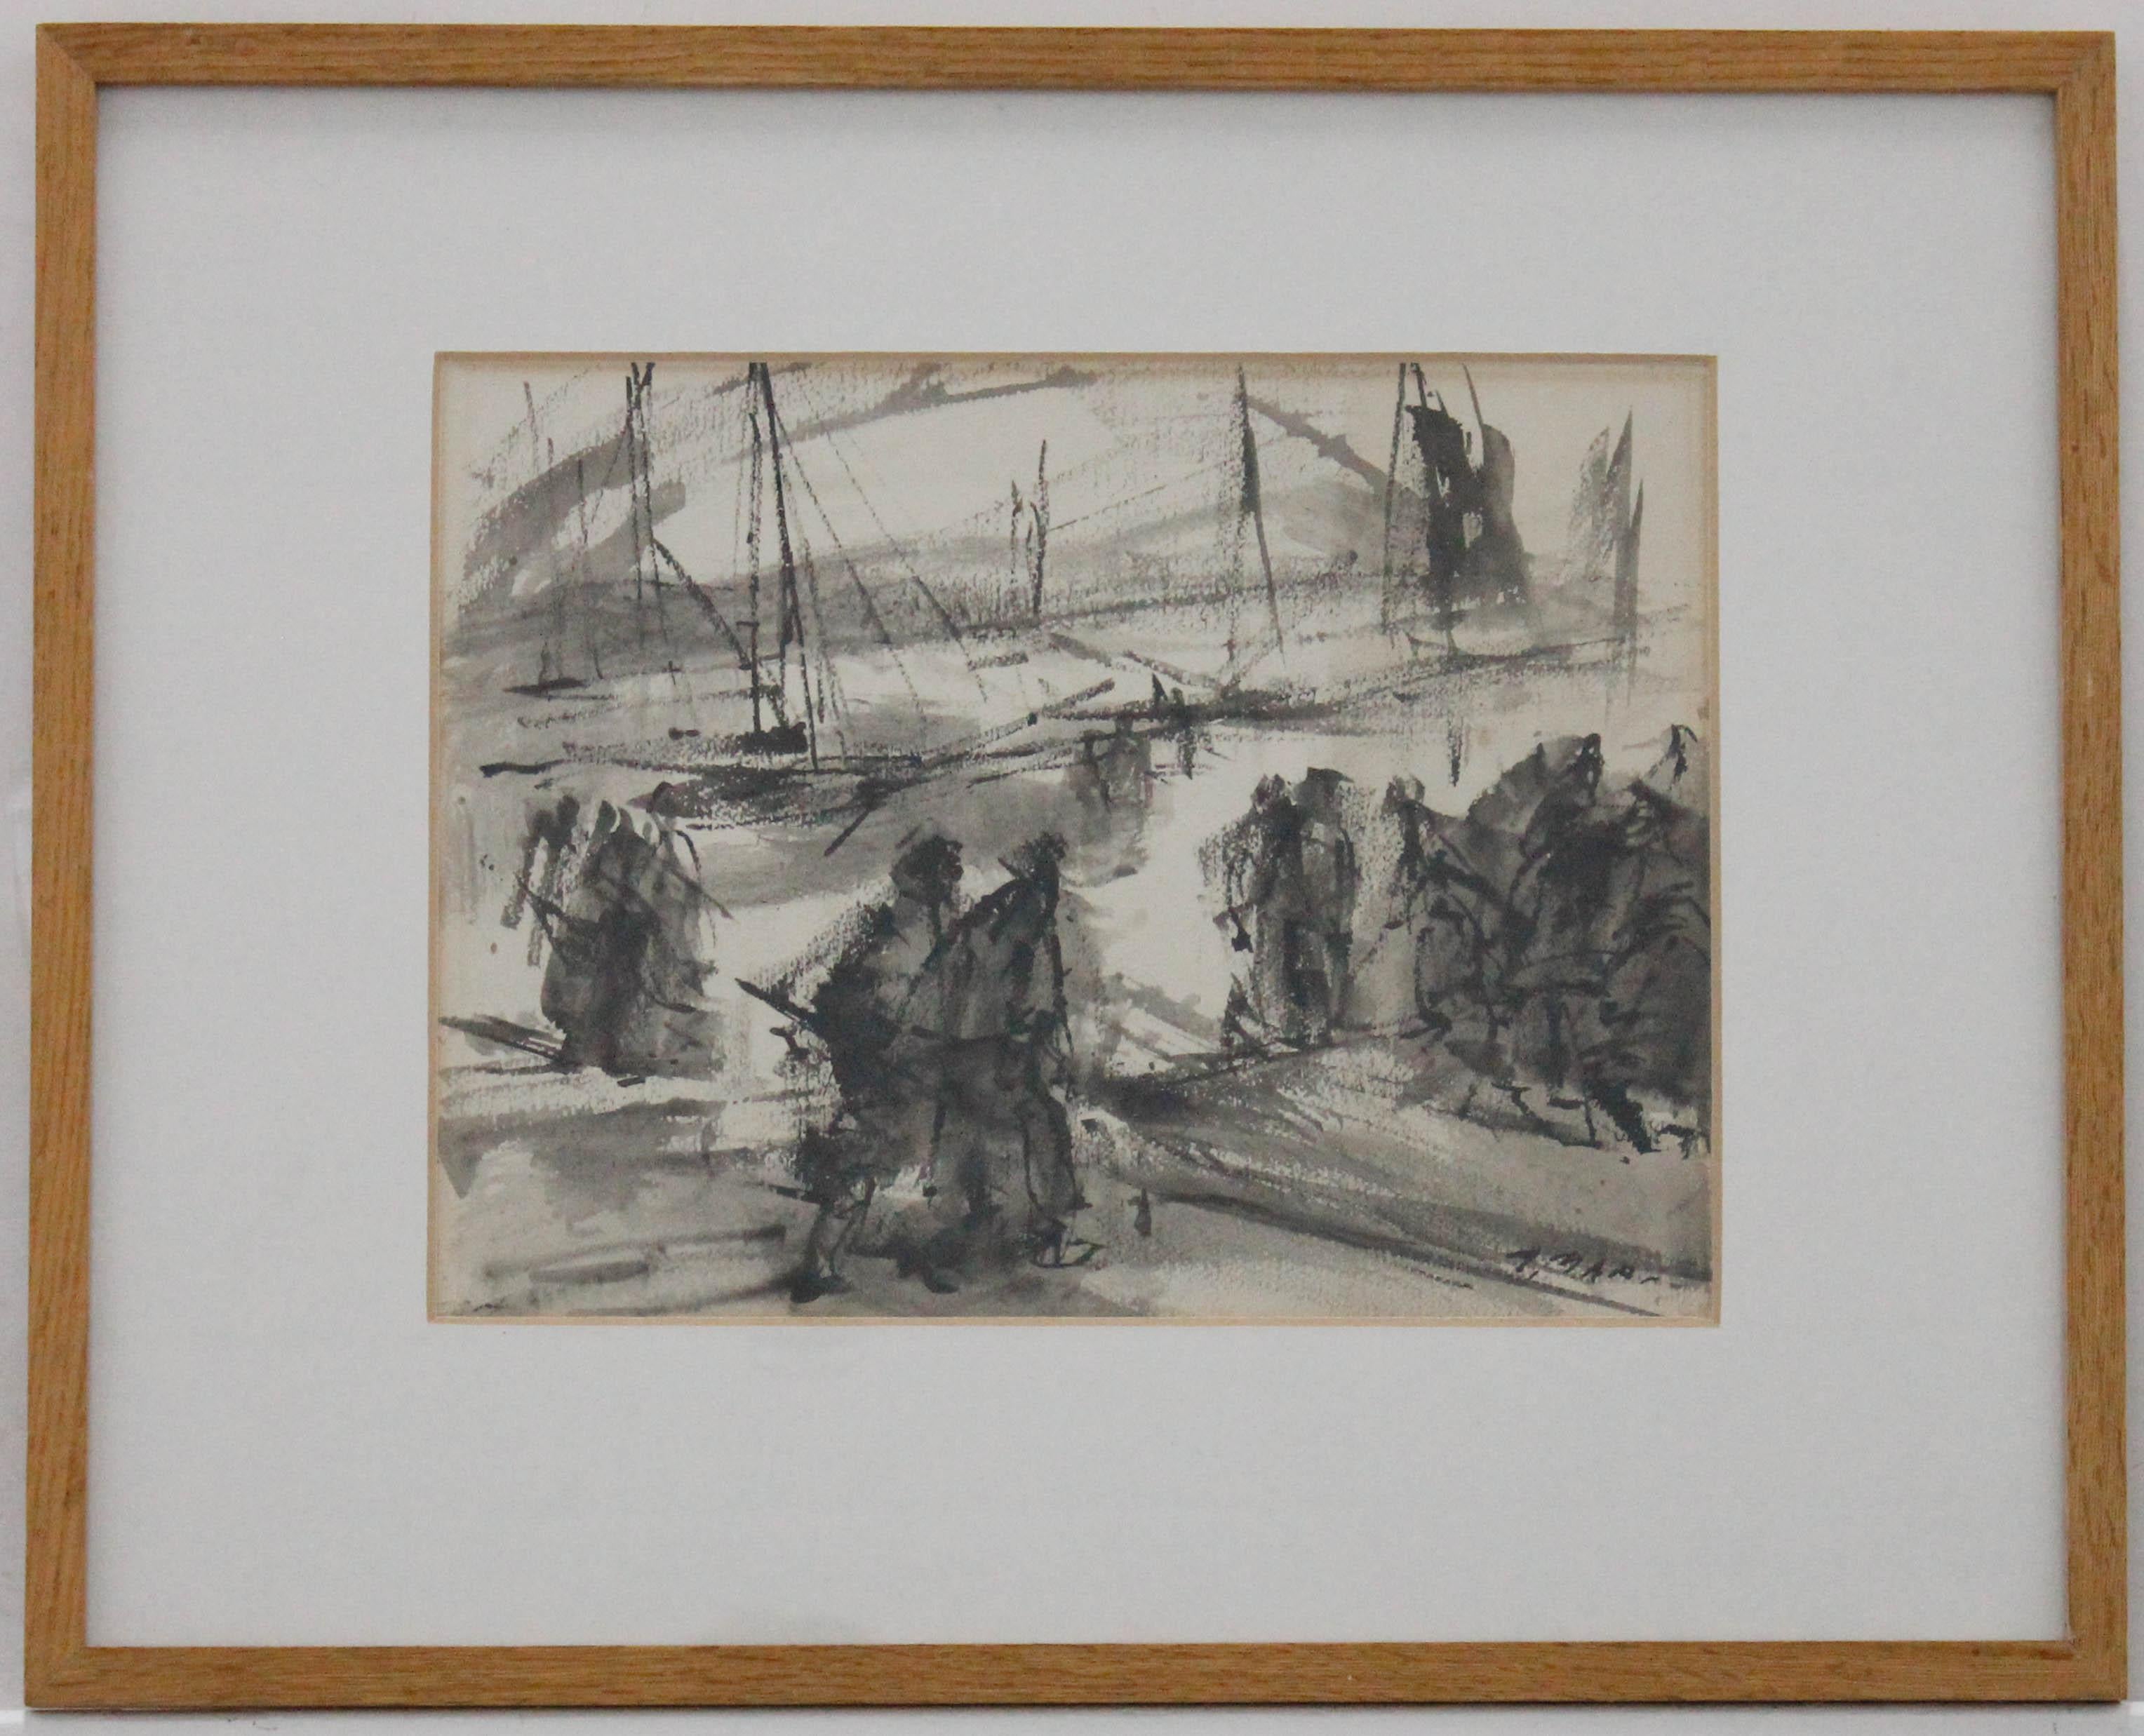 An expressive monochrome scene by Spanish artist Antonio Mari Ribas (1906-1974), depicting figures rushing past harbour masts. Signed to the lower right. Smartly mounted in a natural wood frame. On watercolour paper. 
